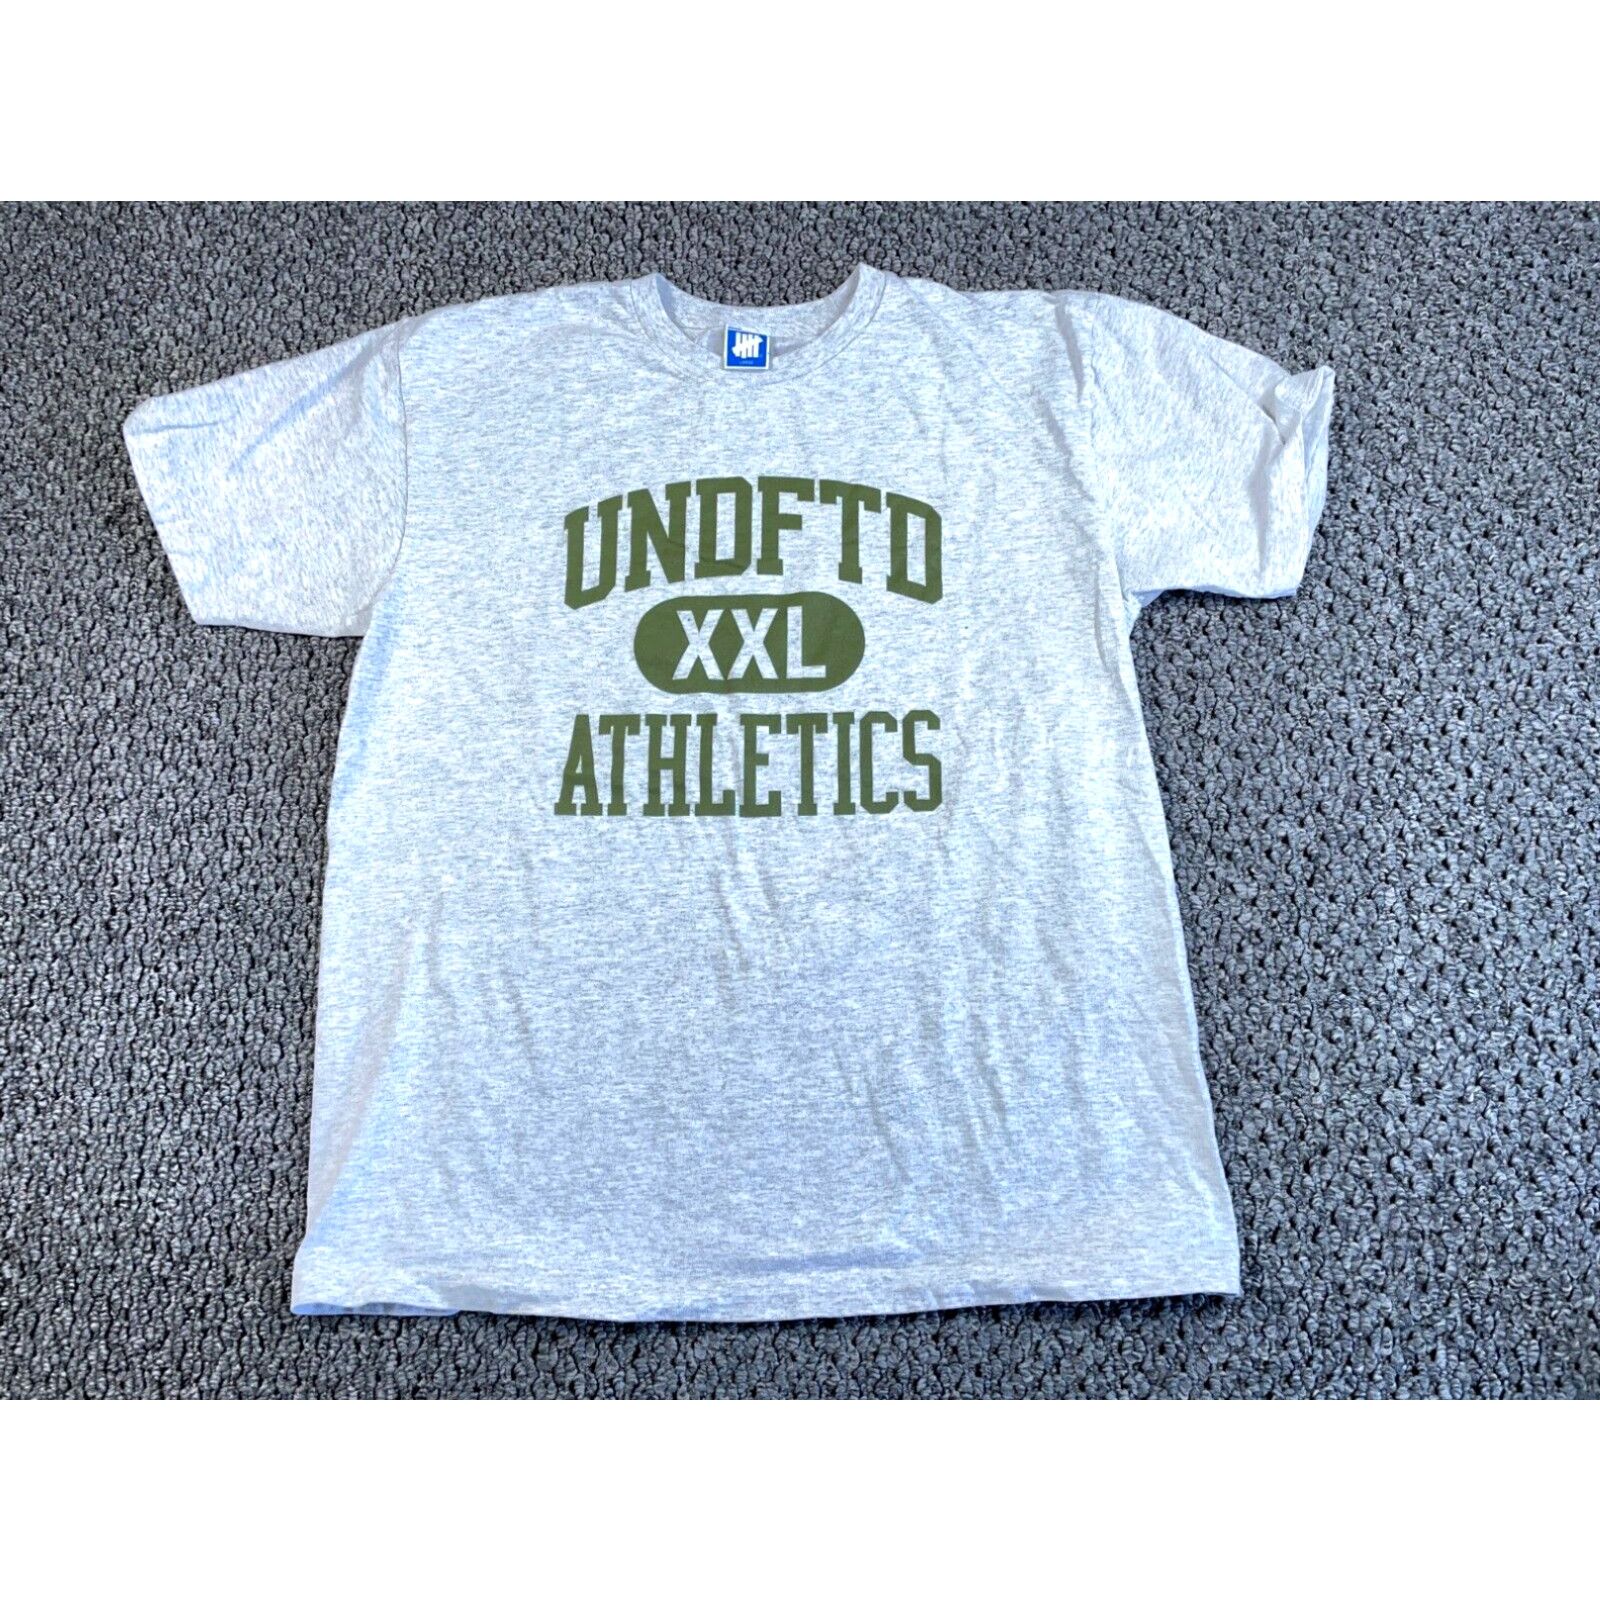 Undefeated Undefeated Athletics Graphic Print T-Shirt Adult Large Heather Gray Streetwear Size US L / EU 52-54 / 3 - 1 Preview